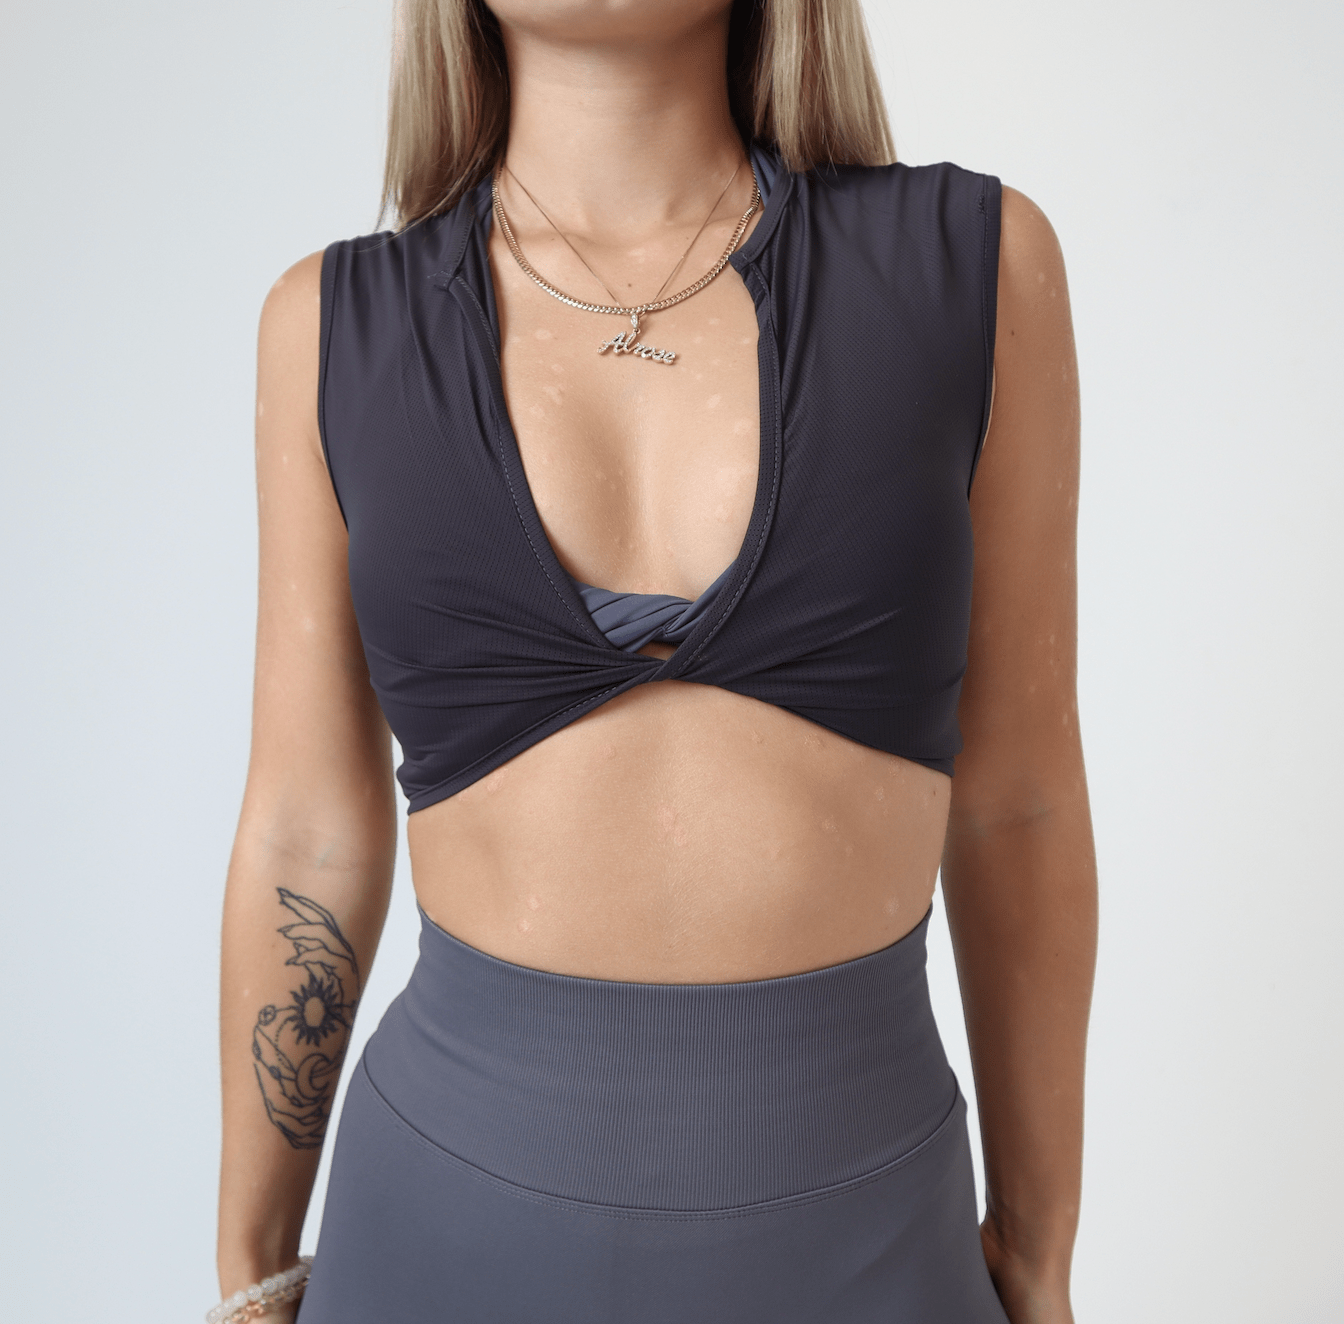 PERFORM CROPPED TOPS - LIBERA Fitness Apparel